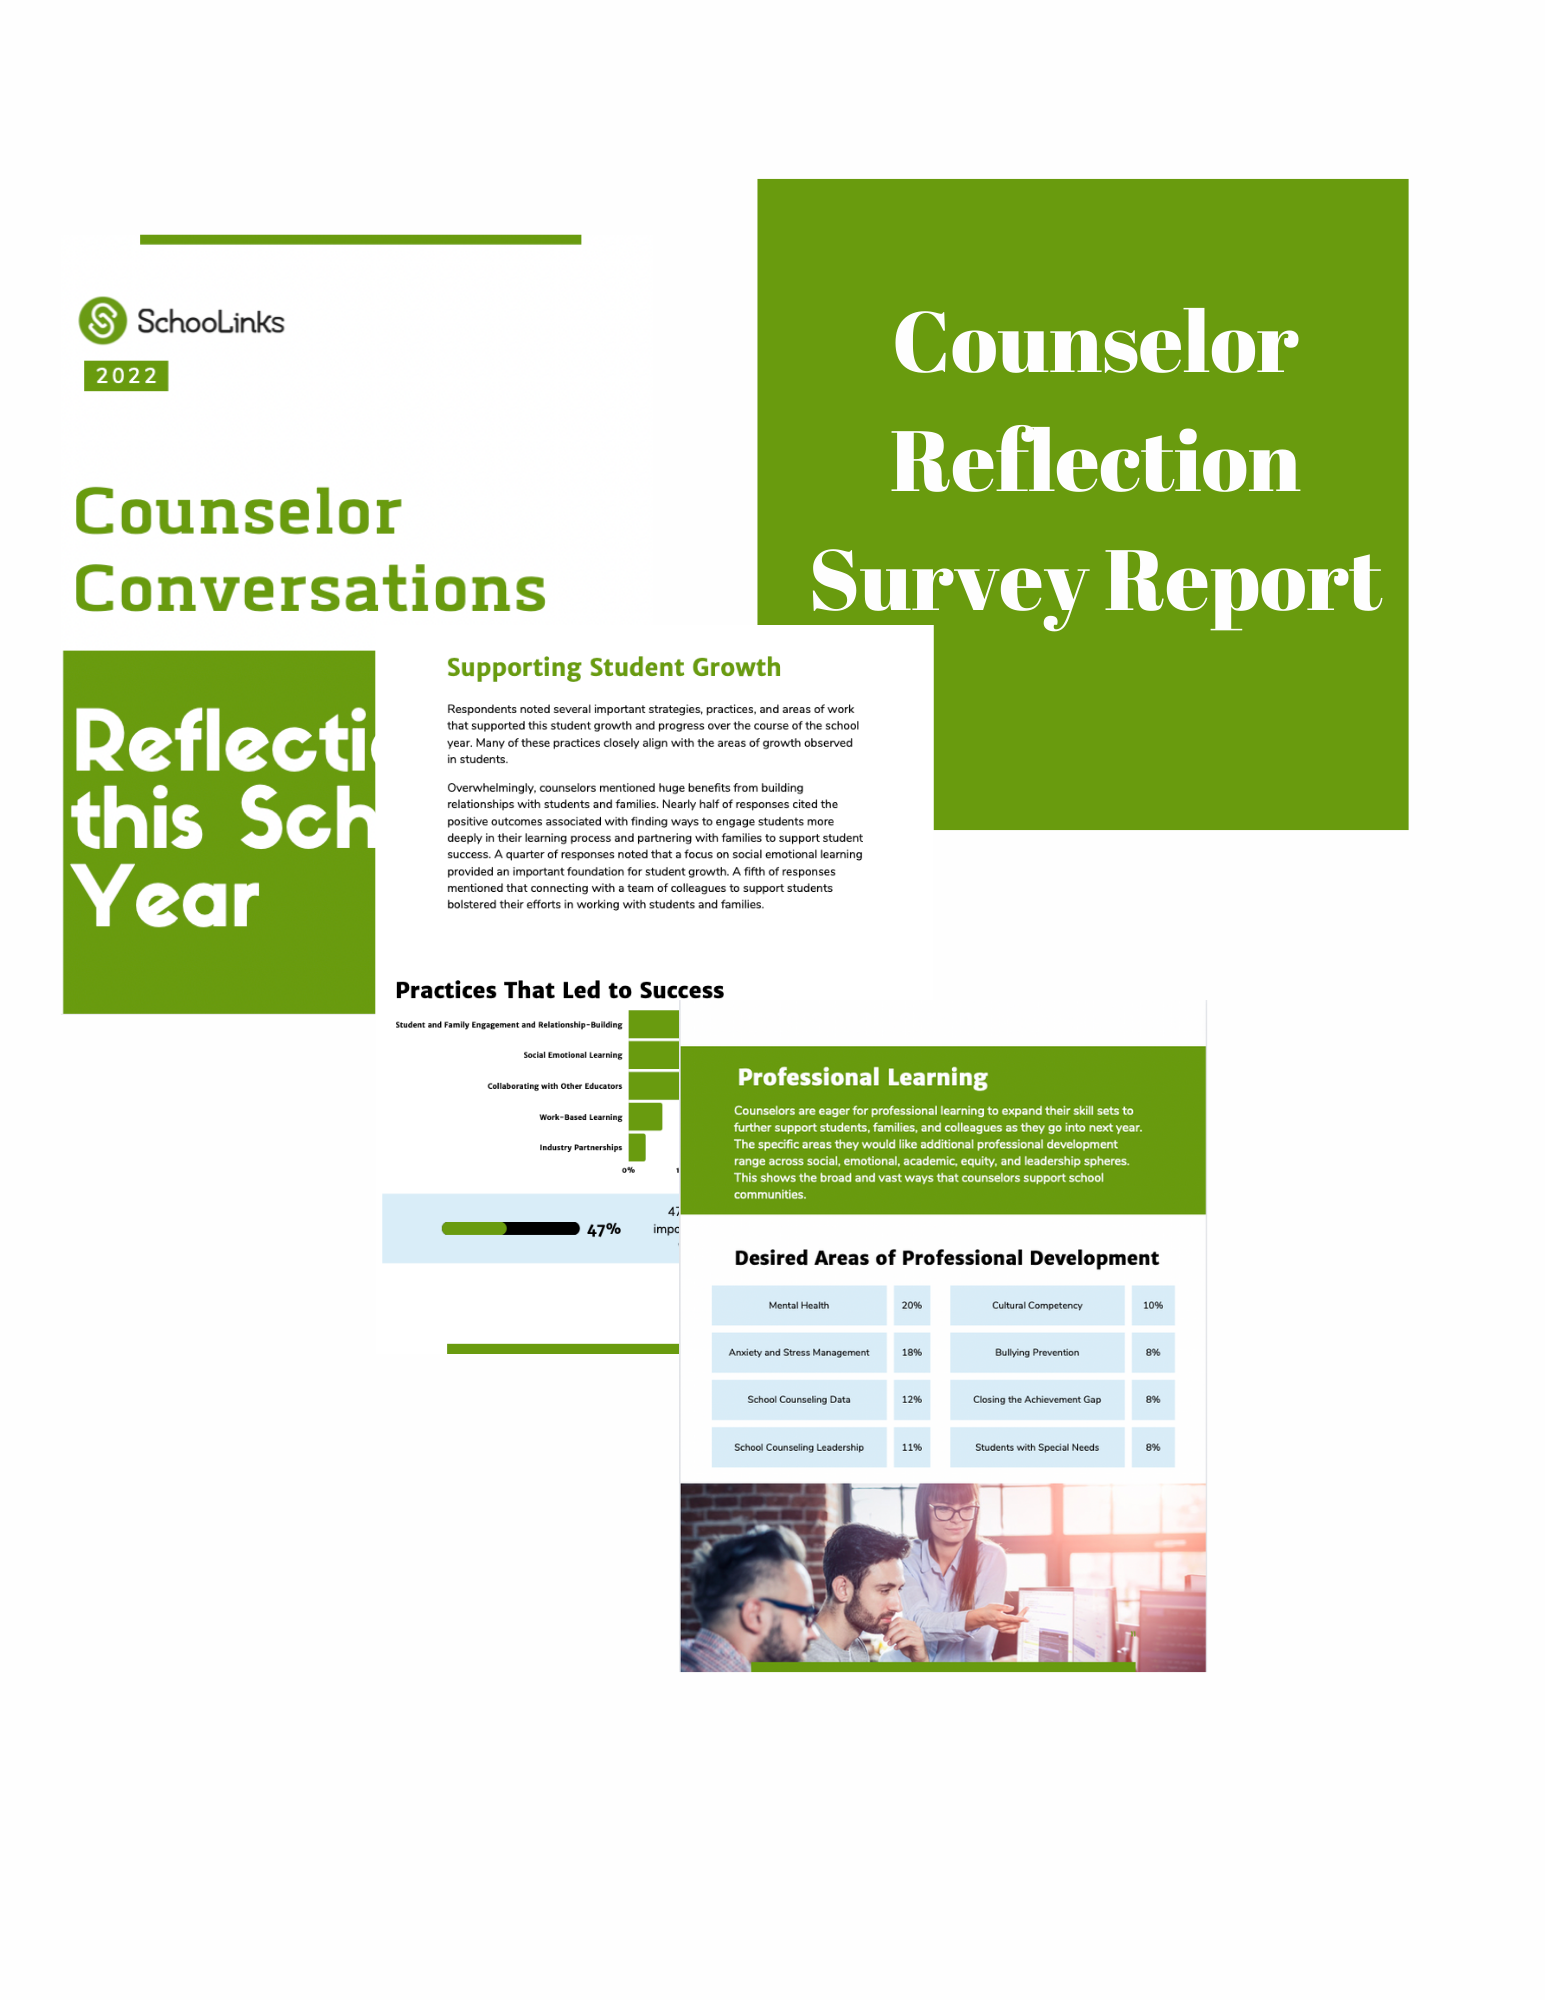 Counselor Reflection Survey Report (1)